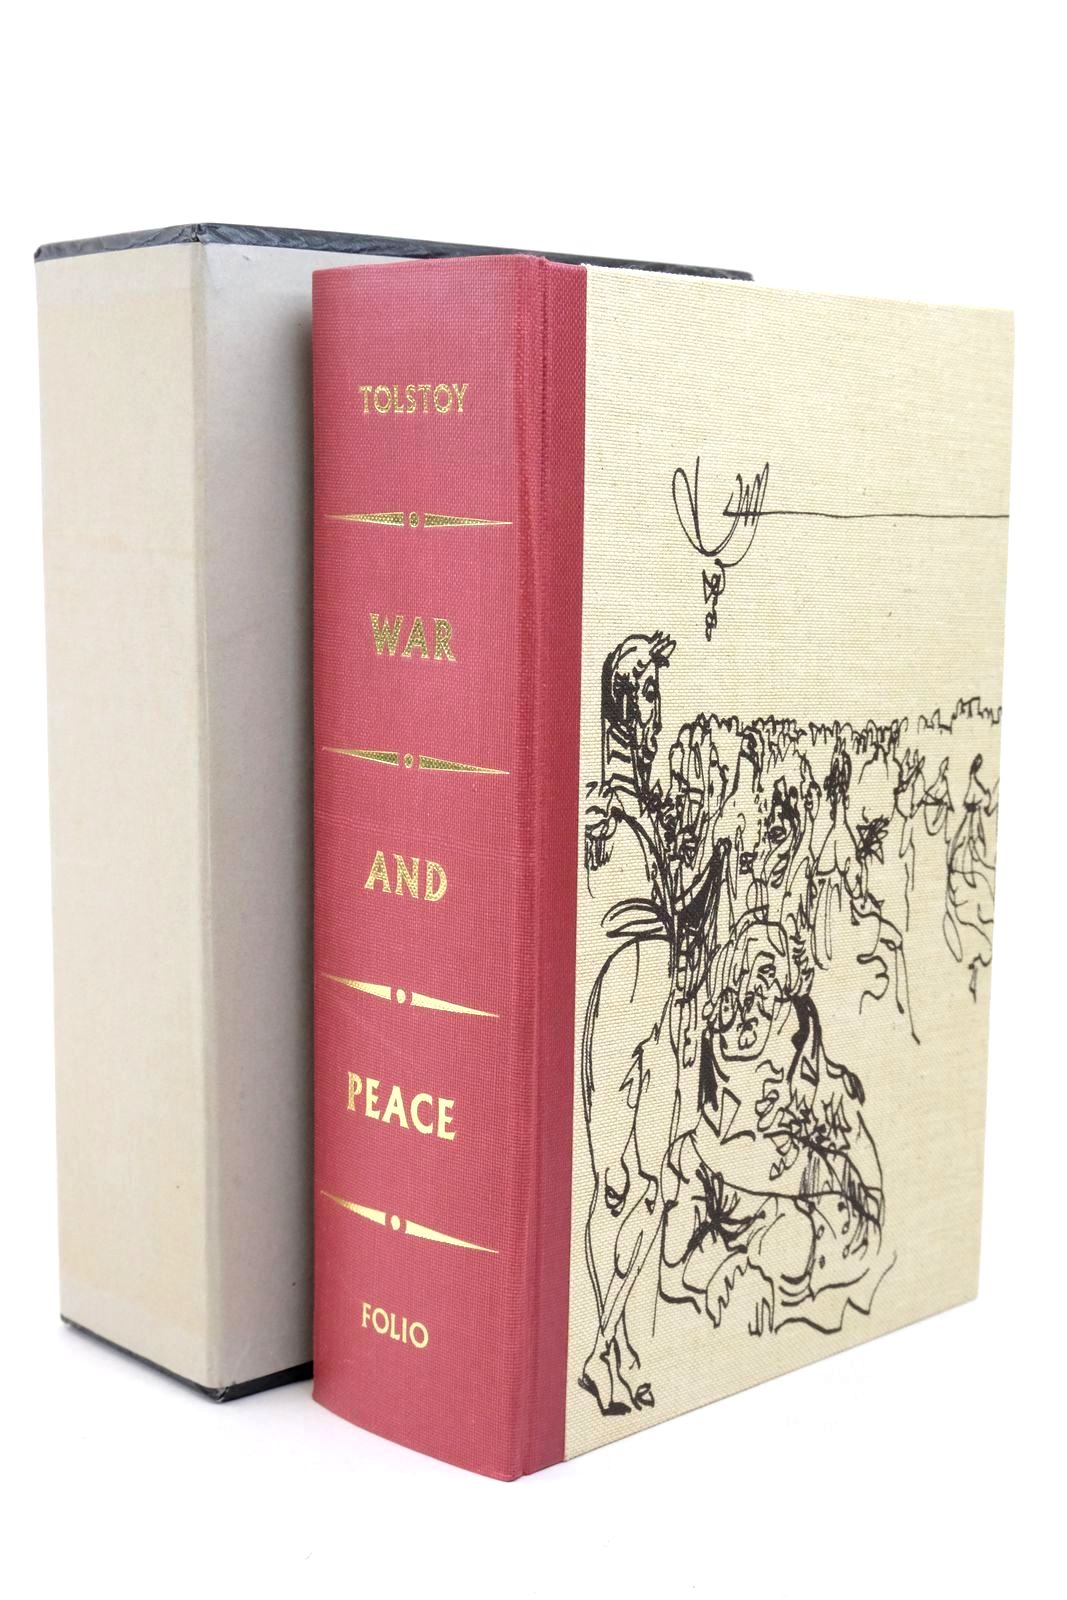 Photo of WAR AND PEACE written by Tolstoy, Leo Edmonds, Rosemary illustrated by Topolski, Feliks published by Folio Society (STOCK CODE: 1322882)  for sale by Stella & Rose's Books